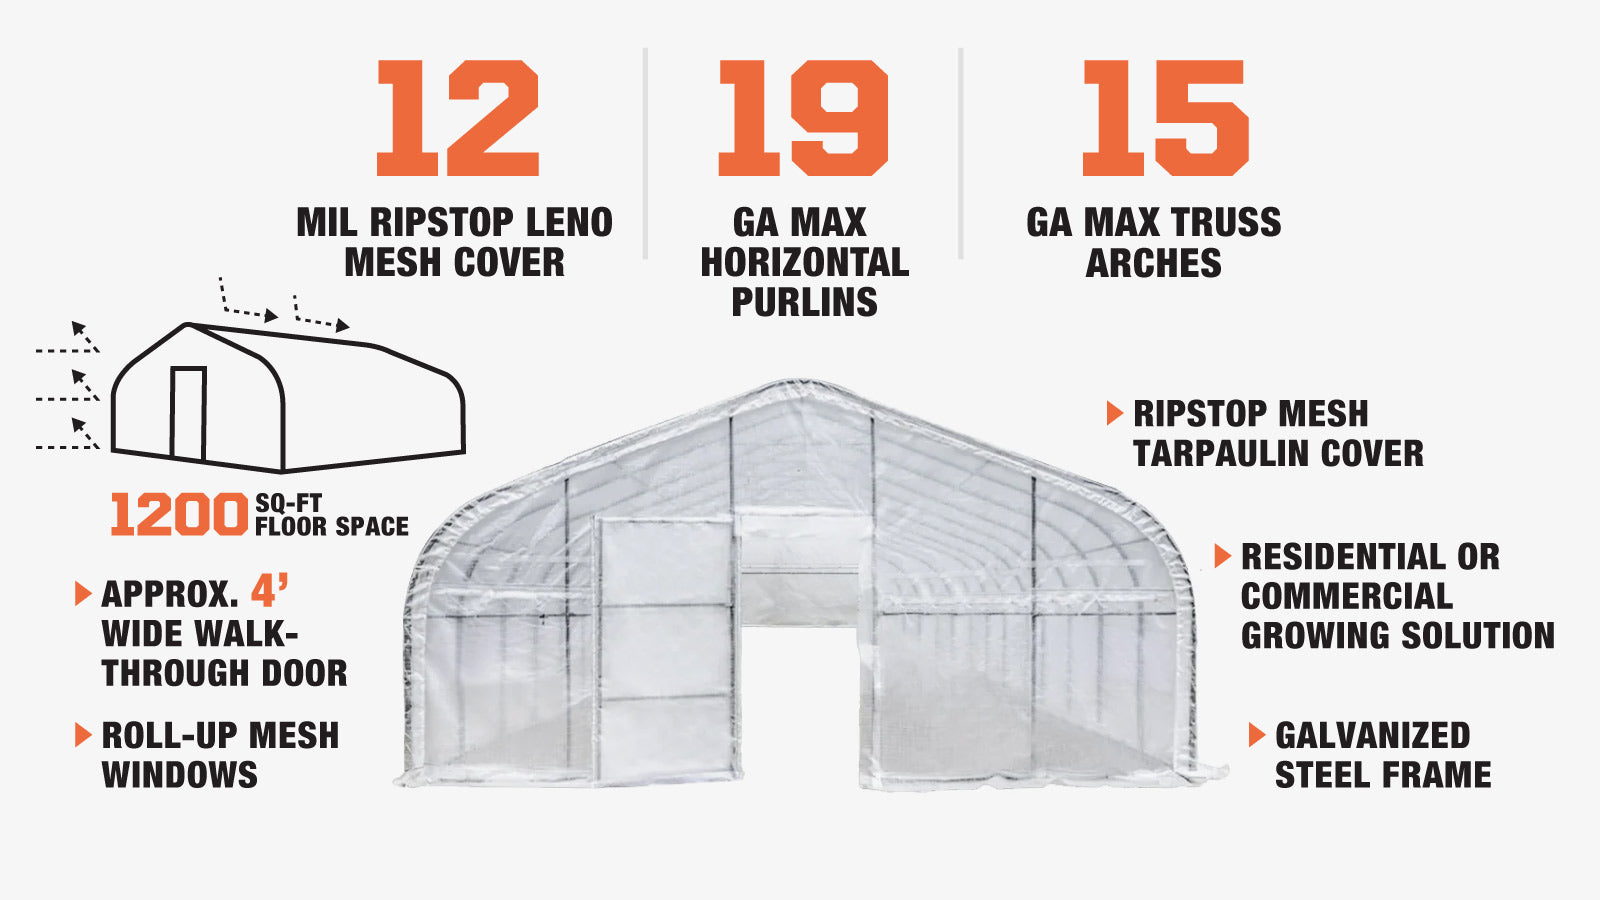 TMG Industrial 20’ x 60’ Tunnel Greenhouse Grow Tent w/12 Mil Ripstop Leno Mesh Cover, Cold Frame, Roll-up Windows, Peak Ceiling Roof, TMG-GH2060-description-image